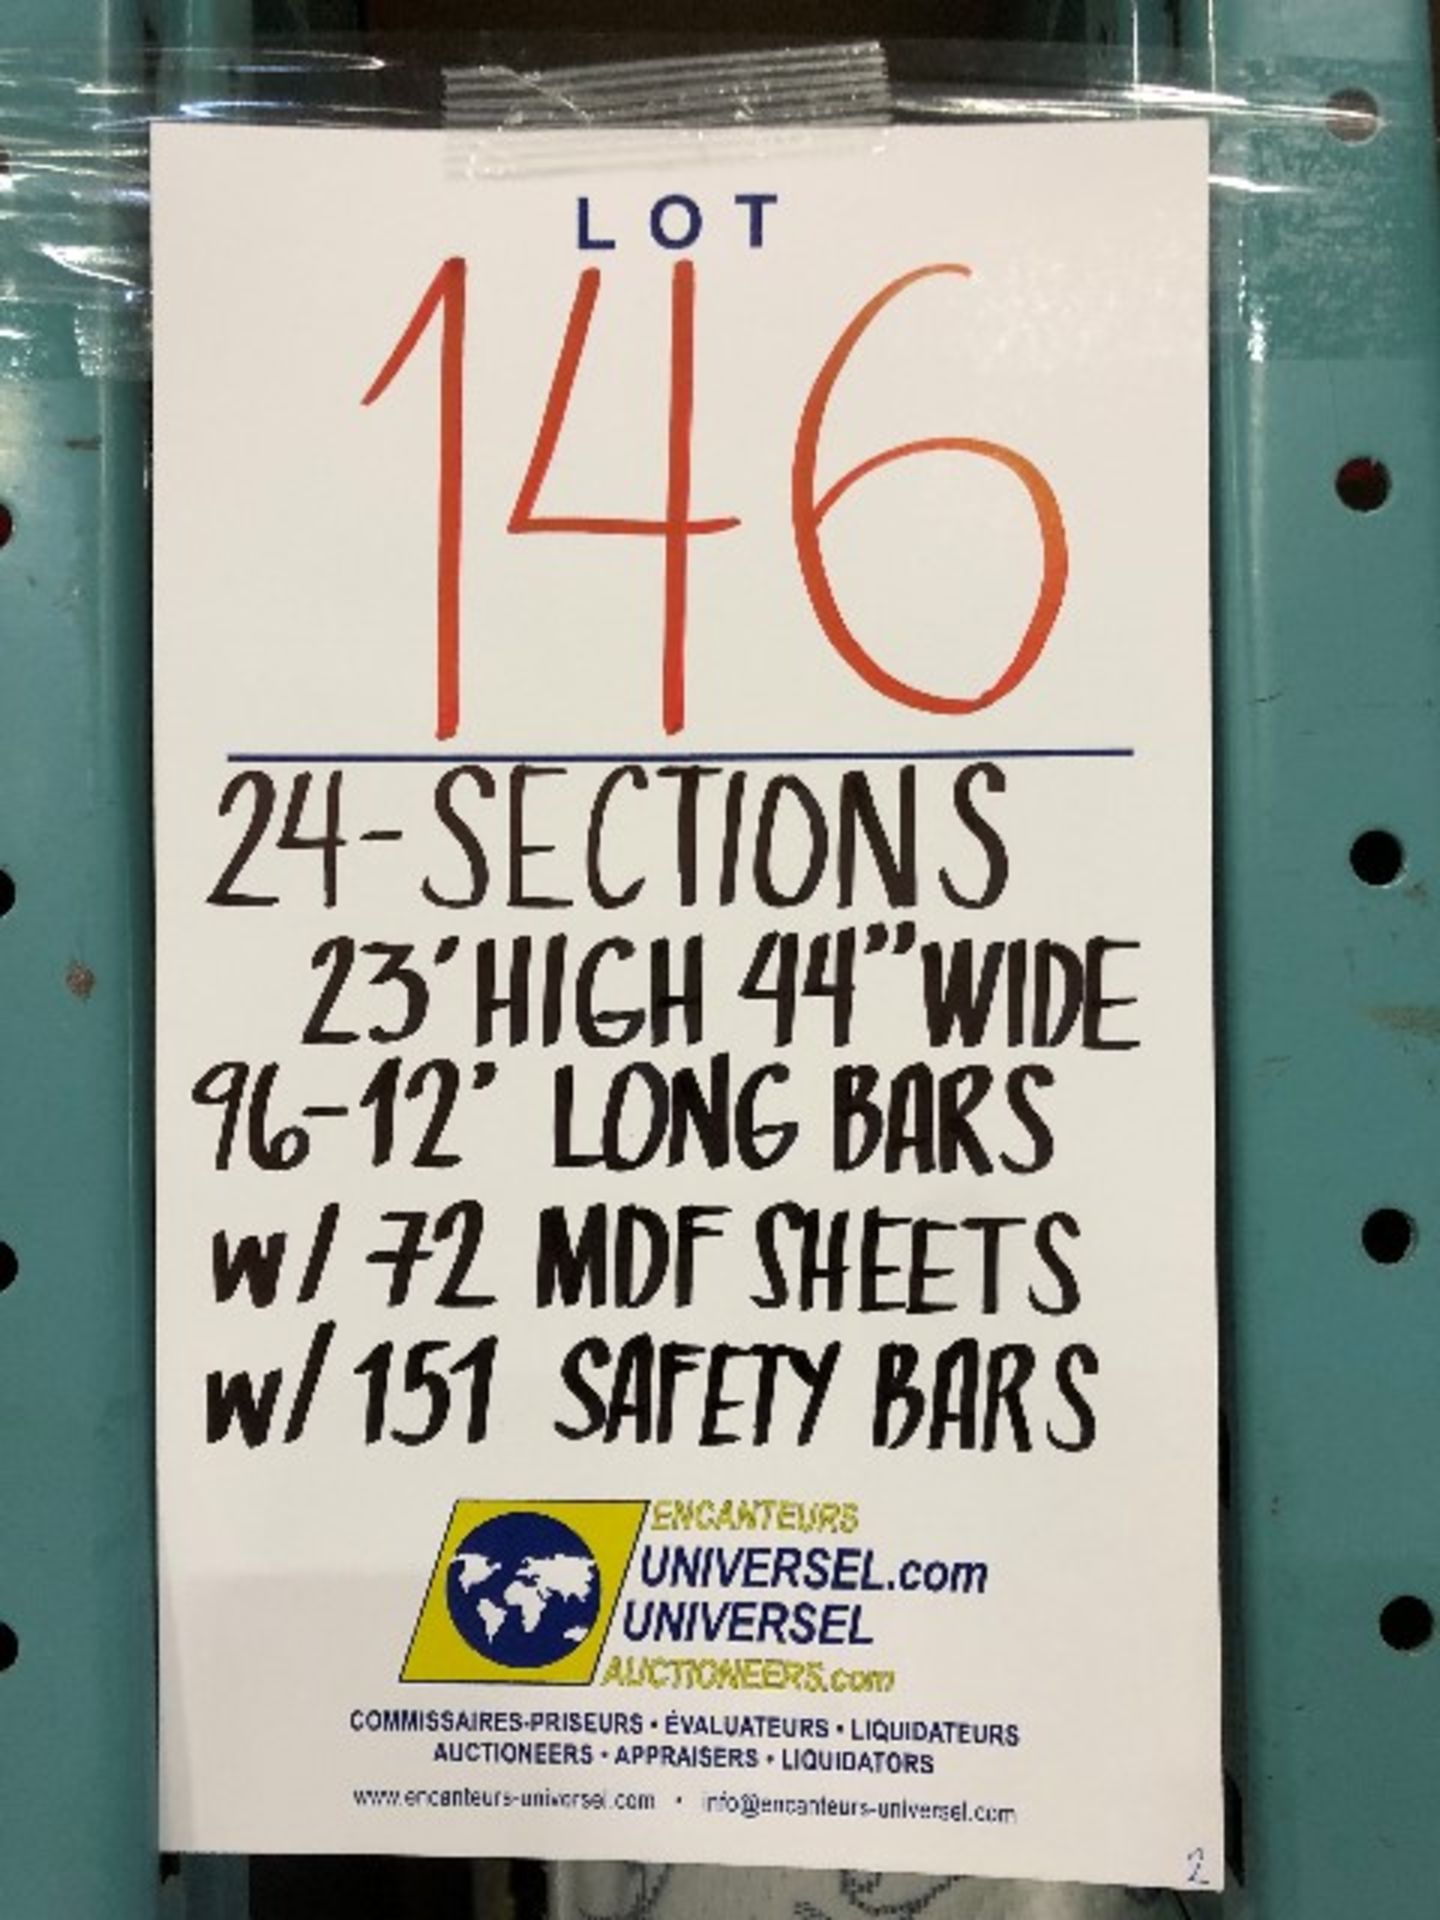 Pallet racking: H.23'xW.44”,96pcs 12'long bars w/72 MDF sheets & 151pcs safety bars,24 sections - Image 4 of 4